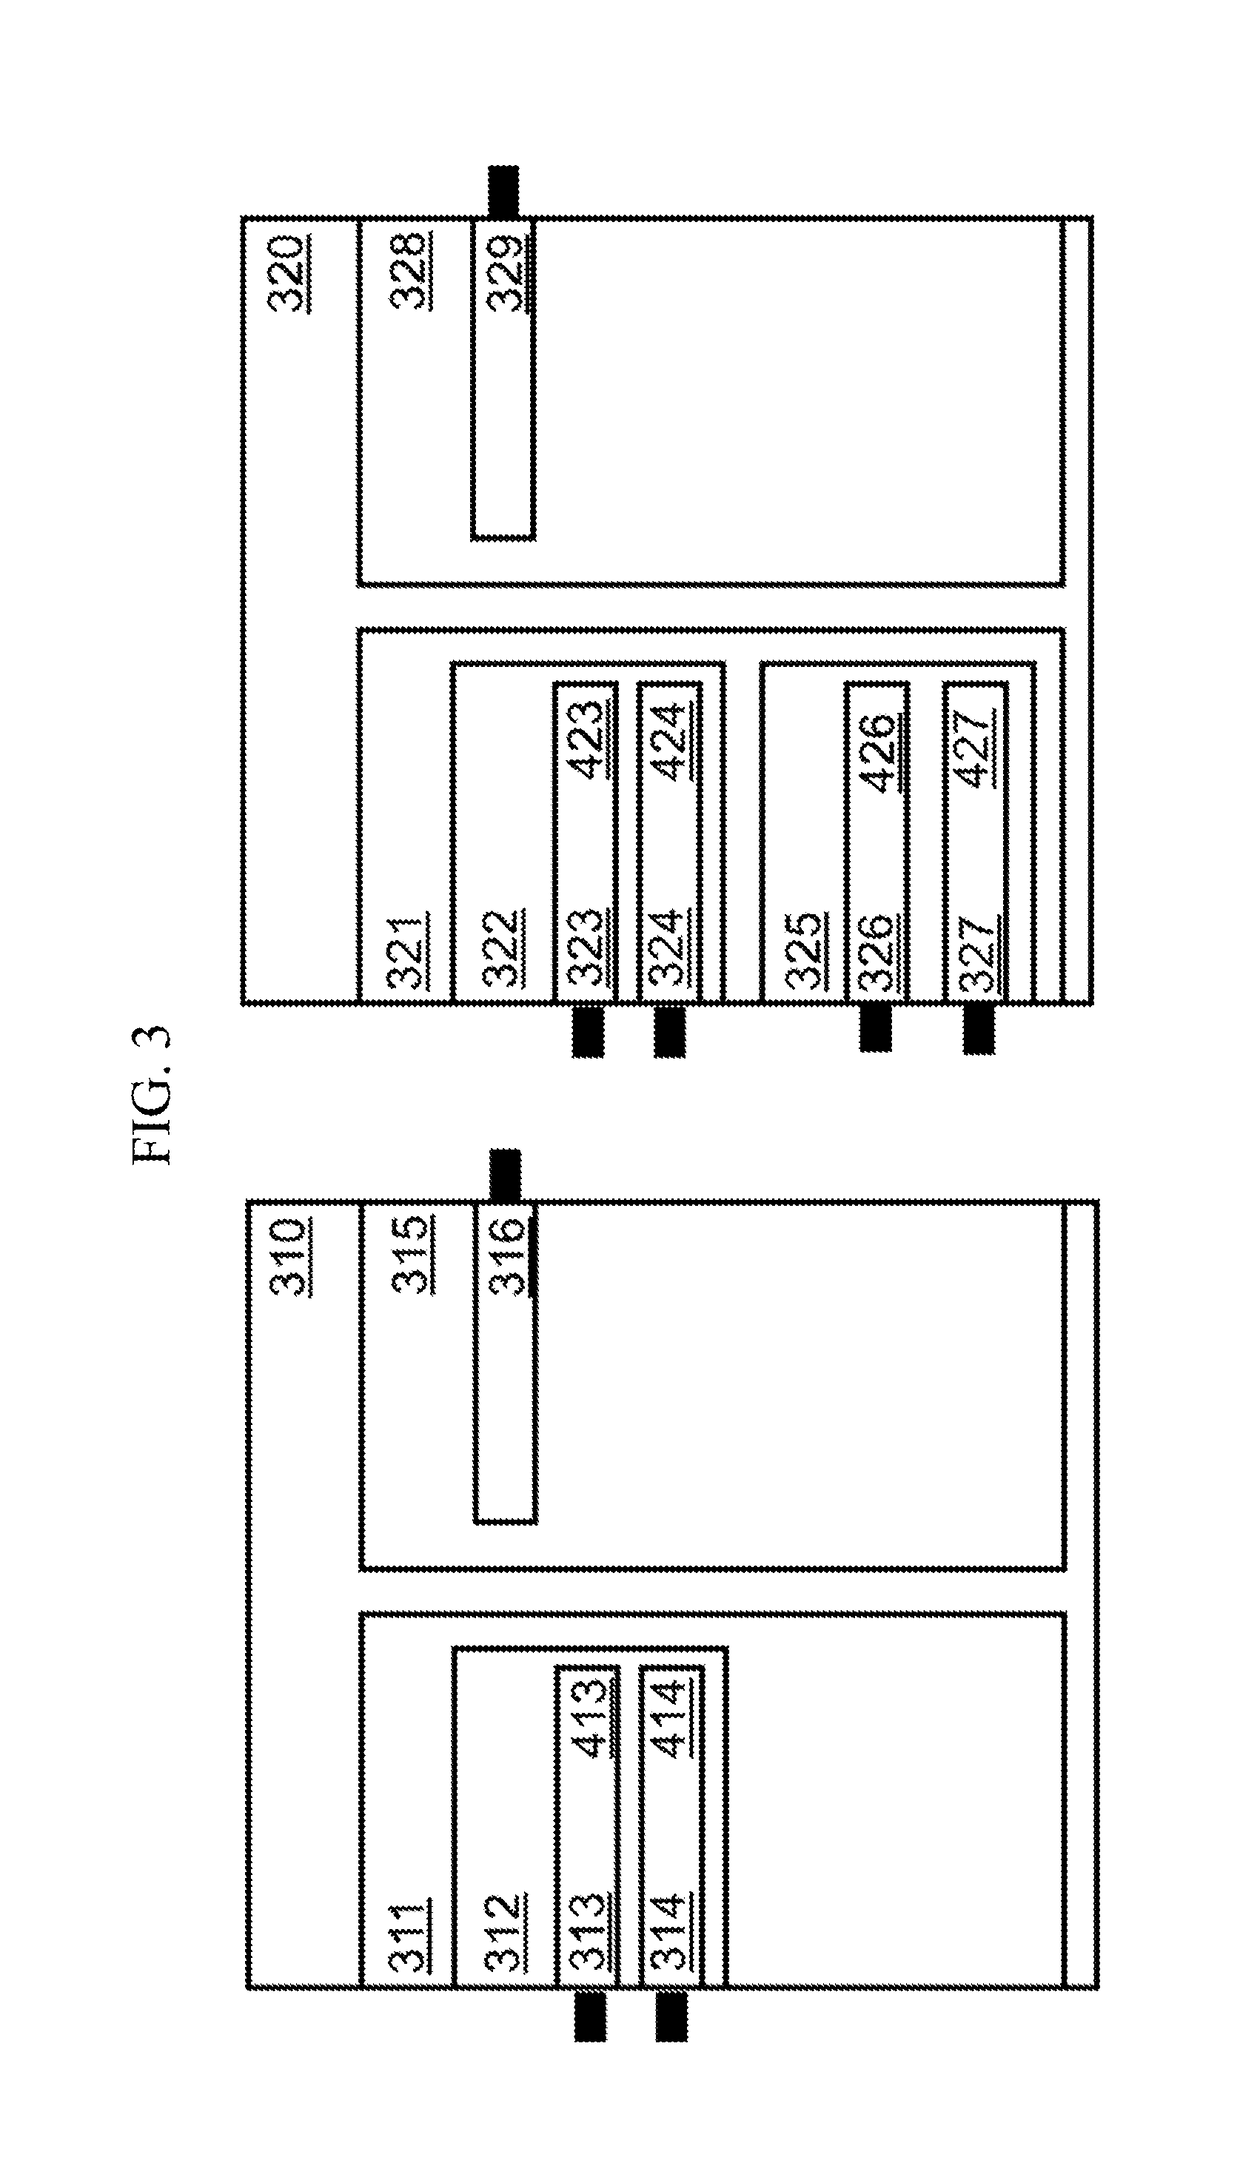 Method of configuring a test device designed to test an electronic control unit, and a configuration system